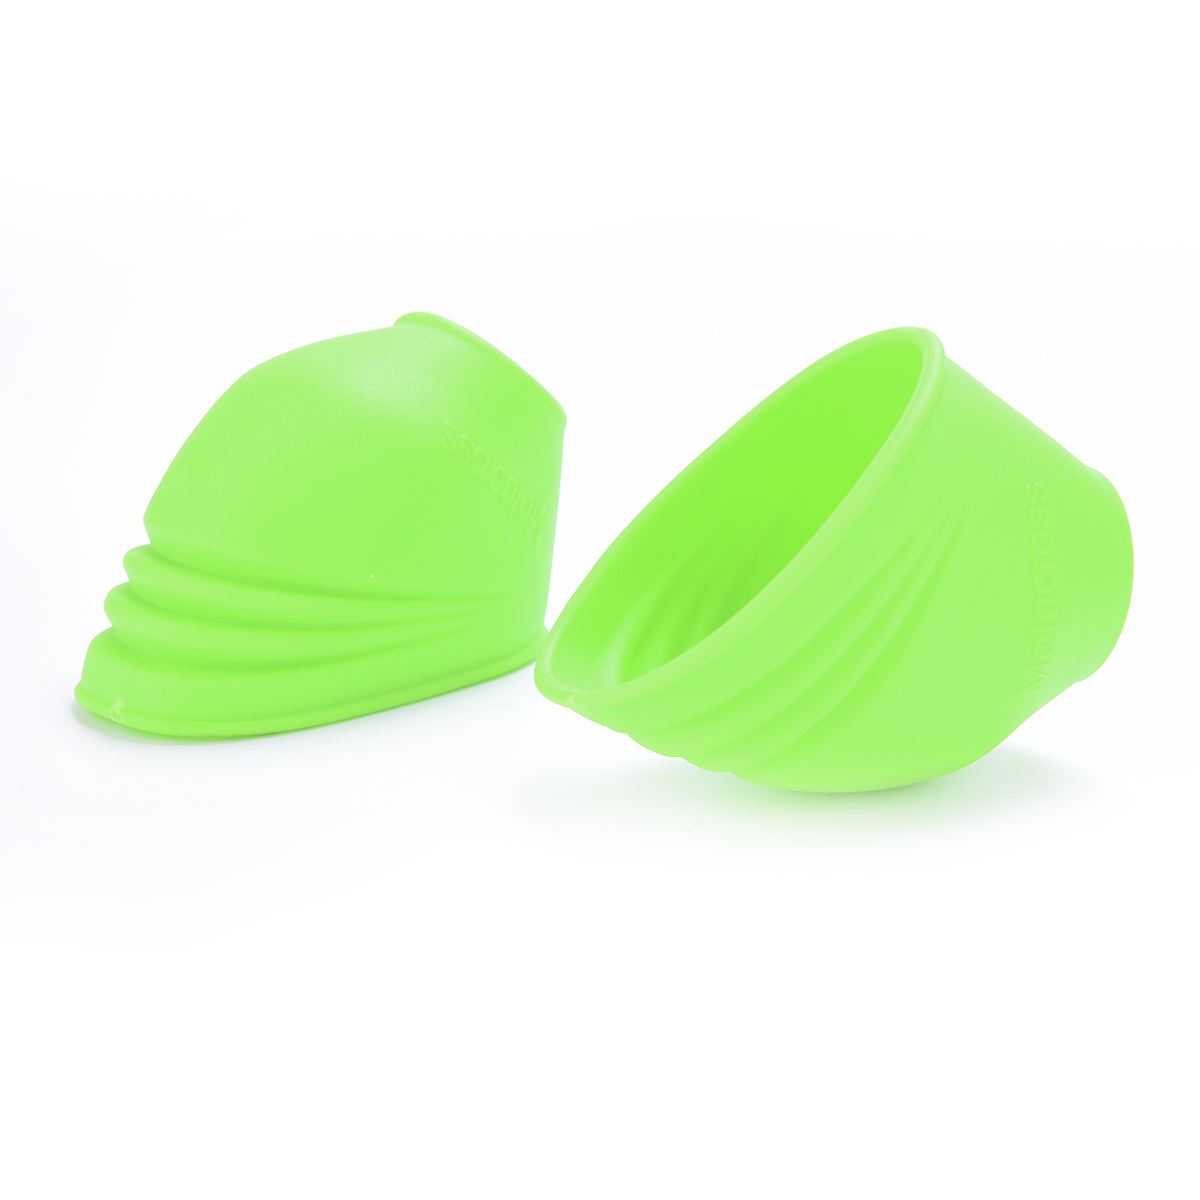 PRO CAKEN Footpeg Protection Cover Foot Peg Guard Protector for CRF450X CRF250X CRF250R Green 